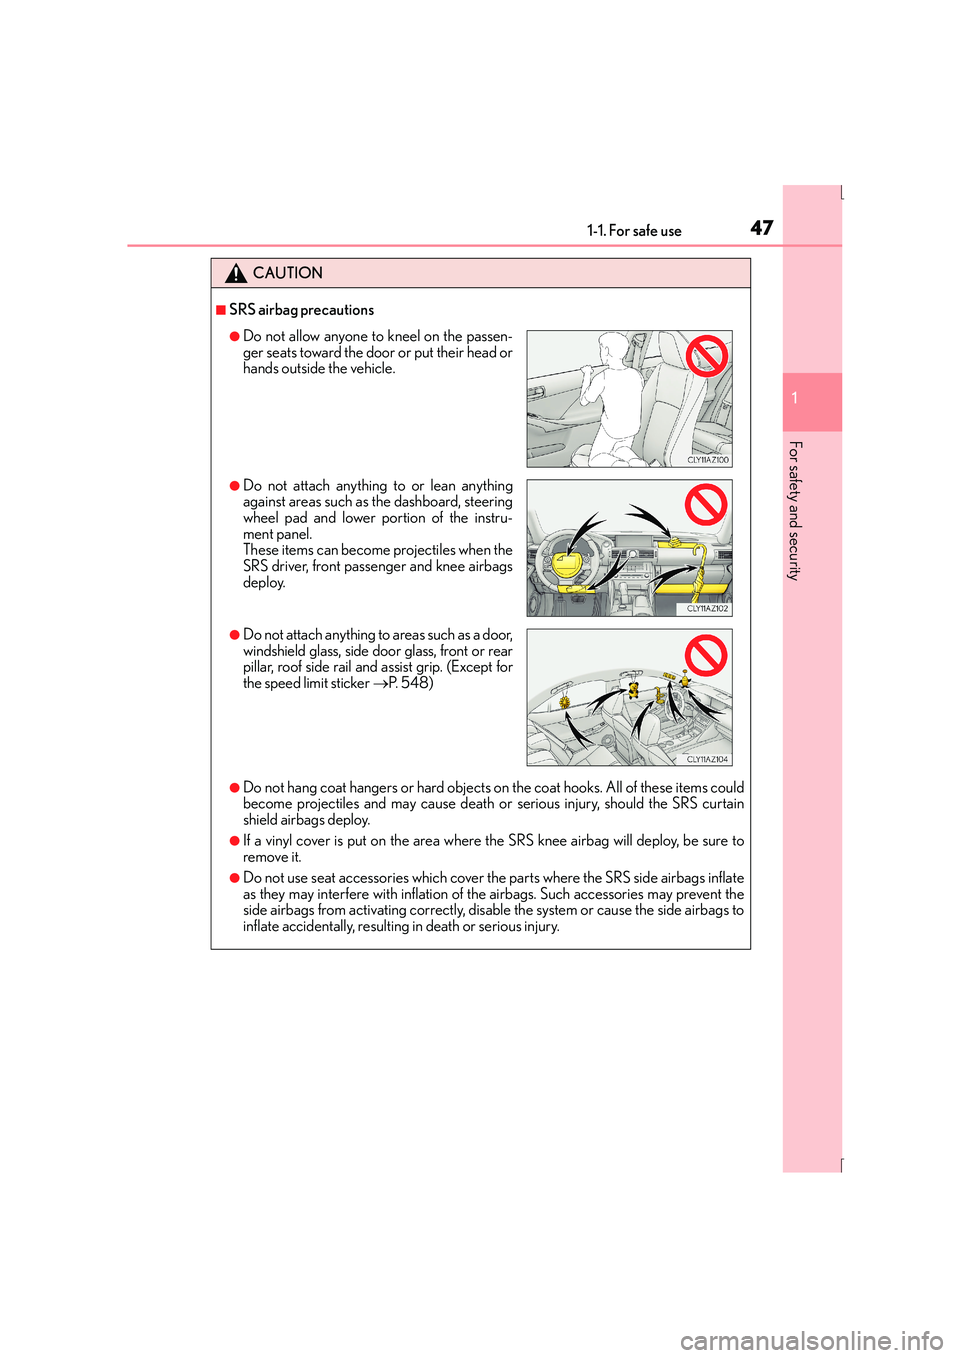 Lexus IS300h 2015 User Guide 471-1. For safe use
1
For safety and security
IS300h_EE(OM53D56E)
CAUTION
■SRS airbag precautions
●Do not hang coat hangers or hard objects on the coat hooks. All of these items could
become proje